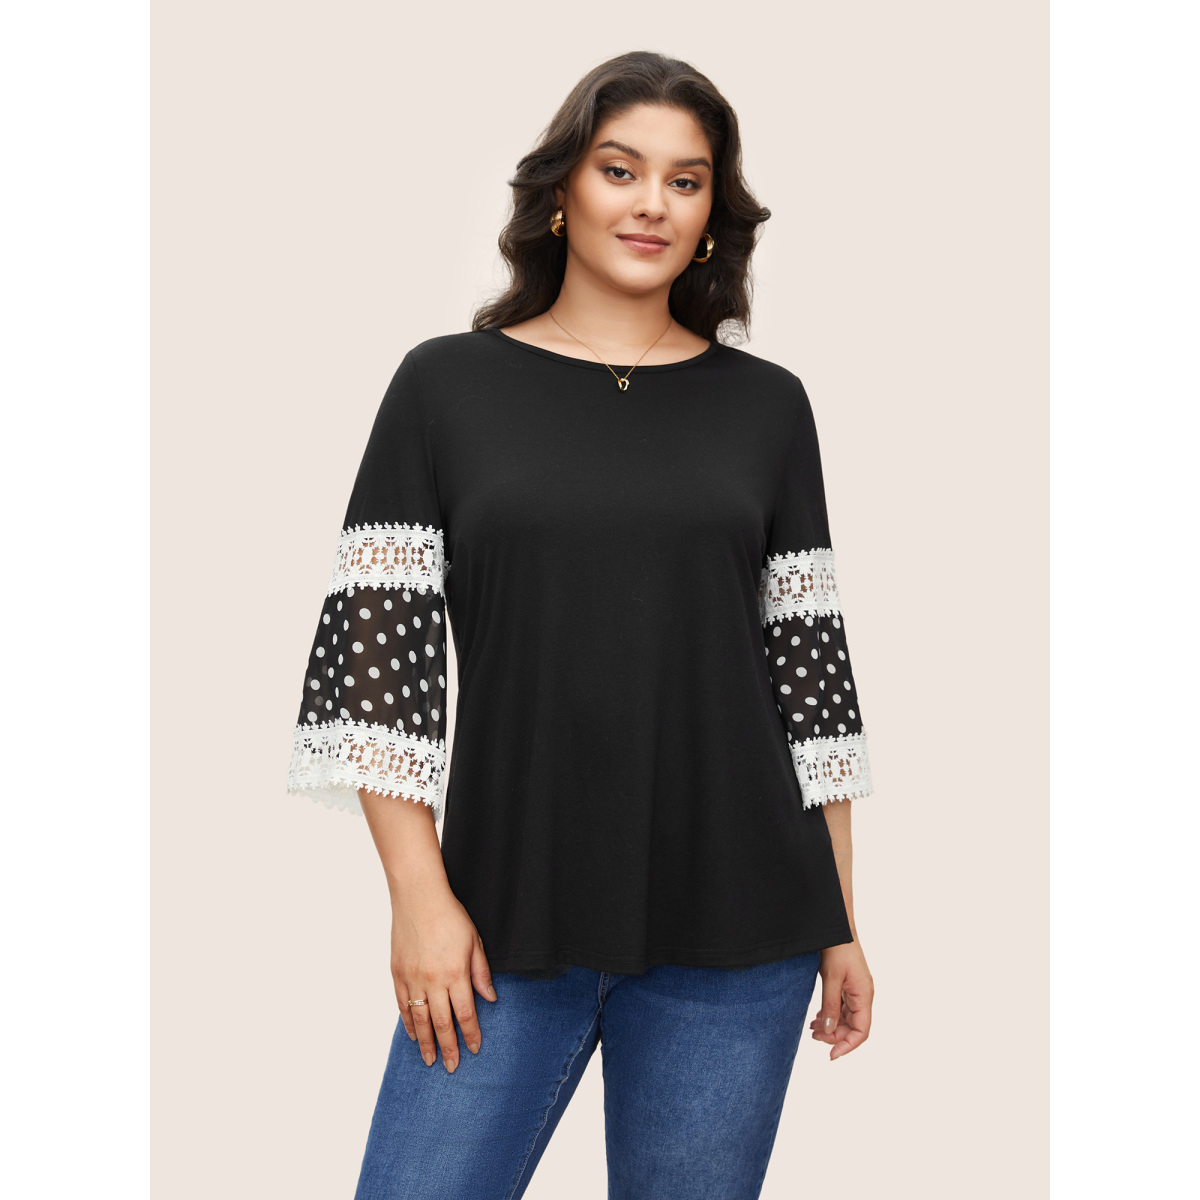 

Plus Size Polka Dot Patchwork Lace Panel Bell Sleeve T-shirt Black Women Elegant Woven ribbon&lace trim Round Neck Everyday T-shirts BloomChic